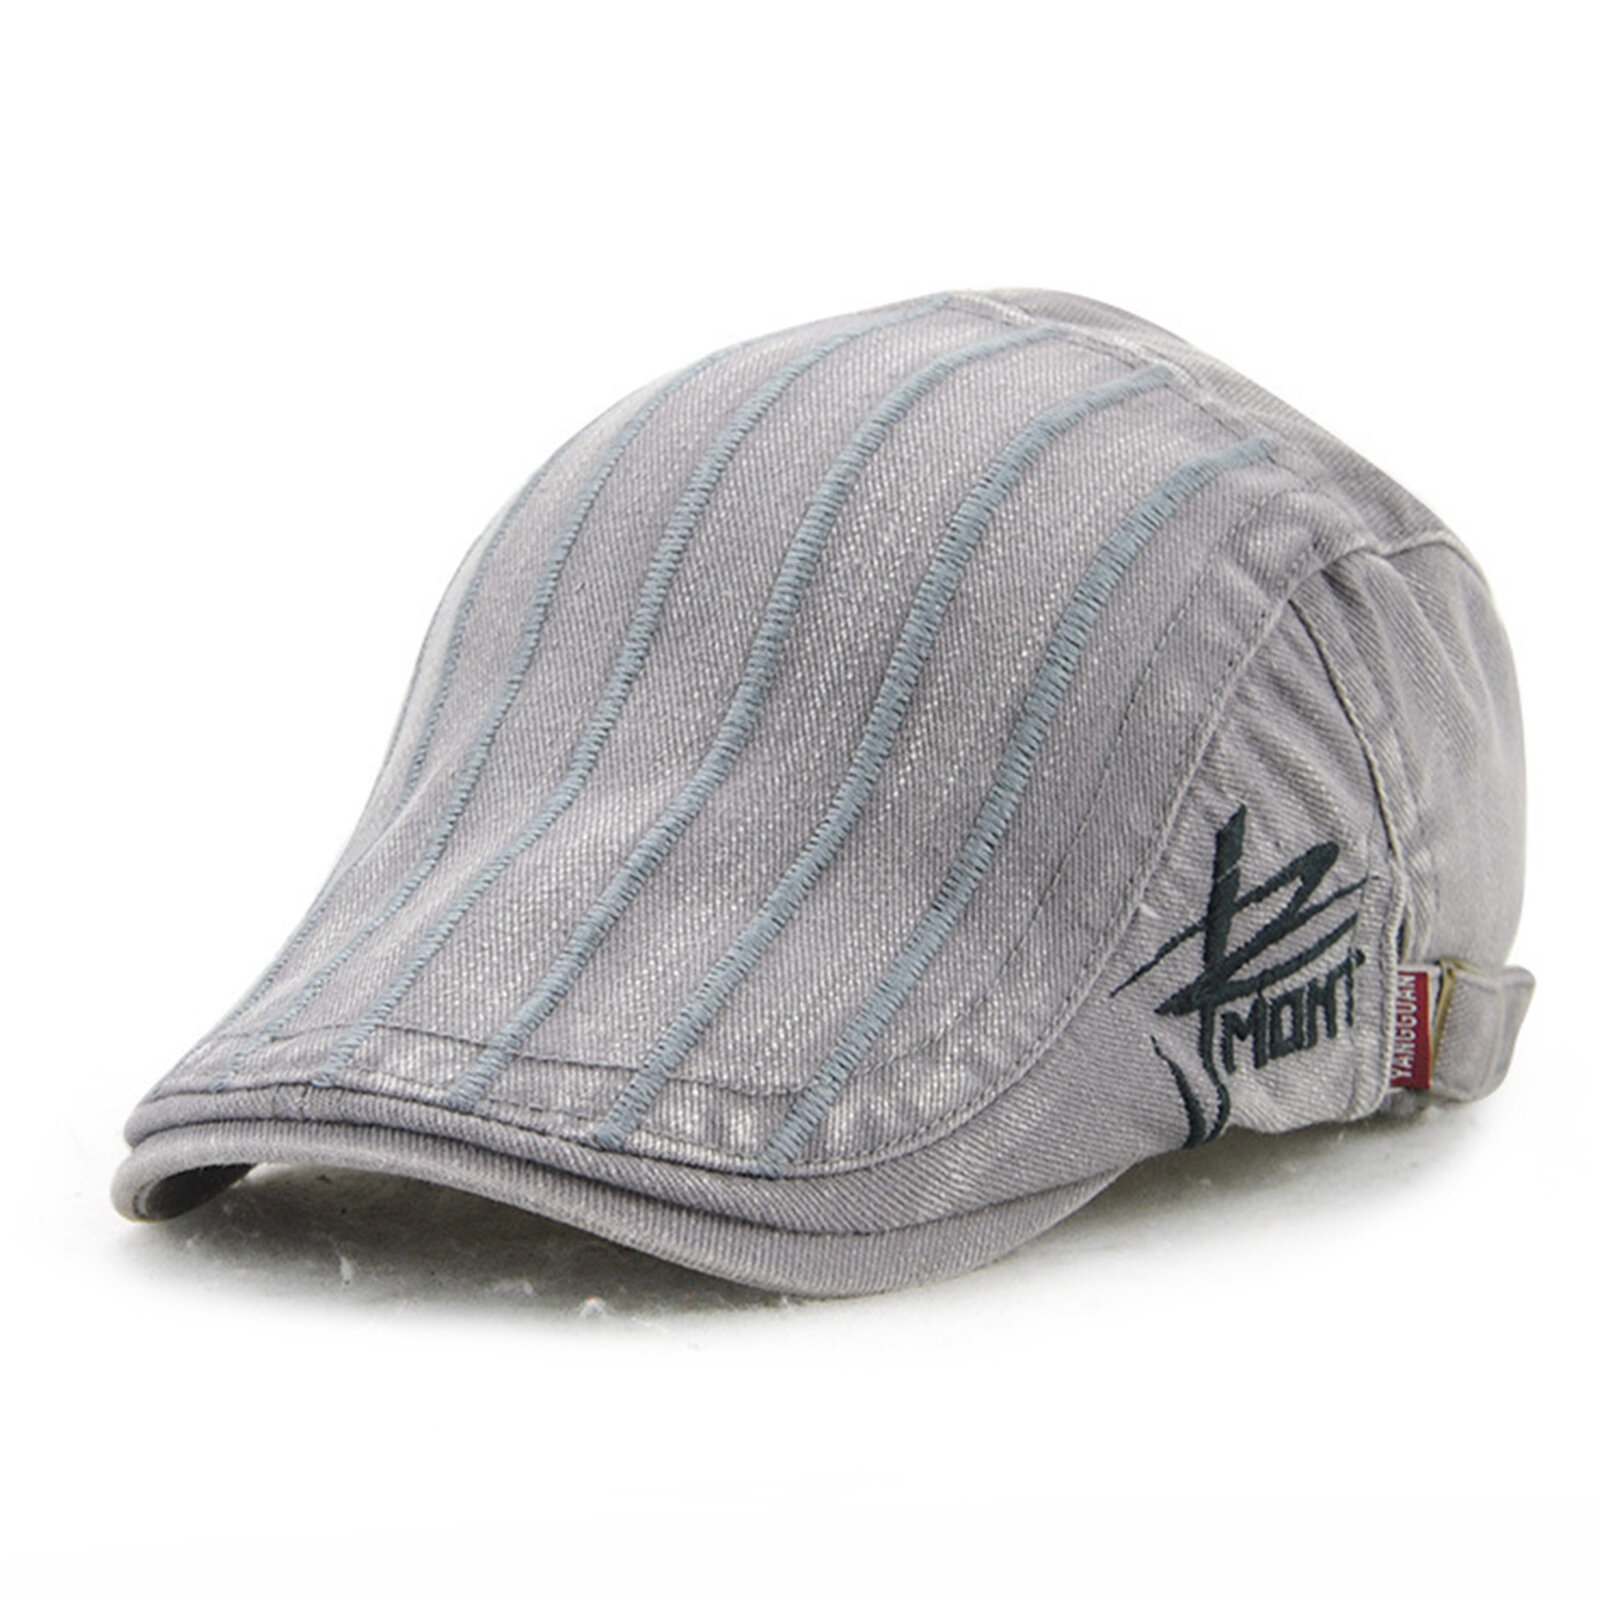 Menico Men Embroidered Striped Outdoor Casual Beret Sun Hat Flat Cap